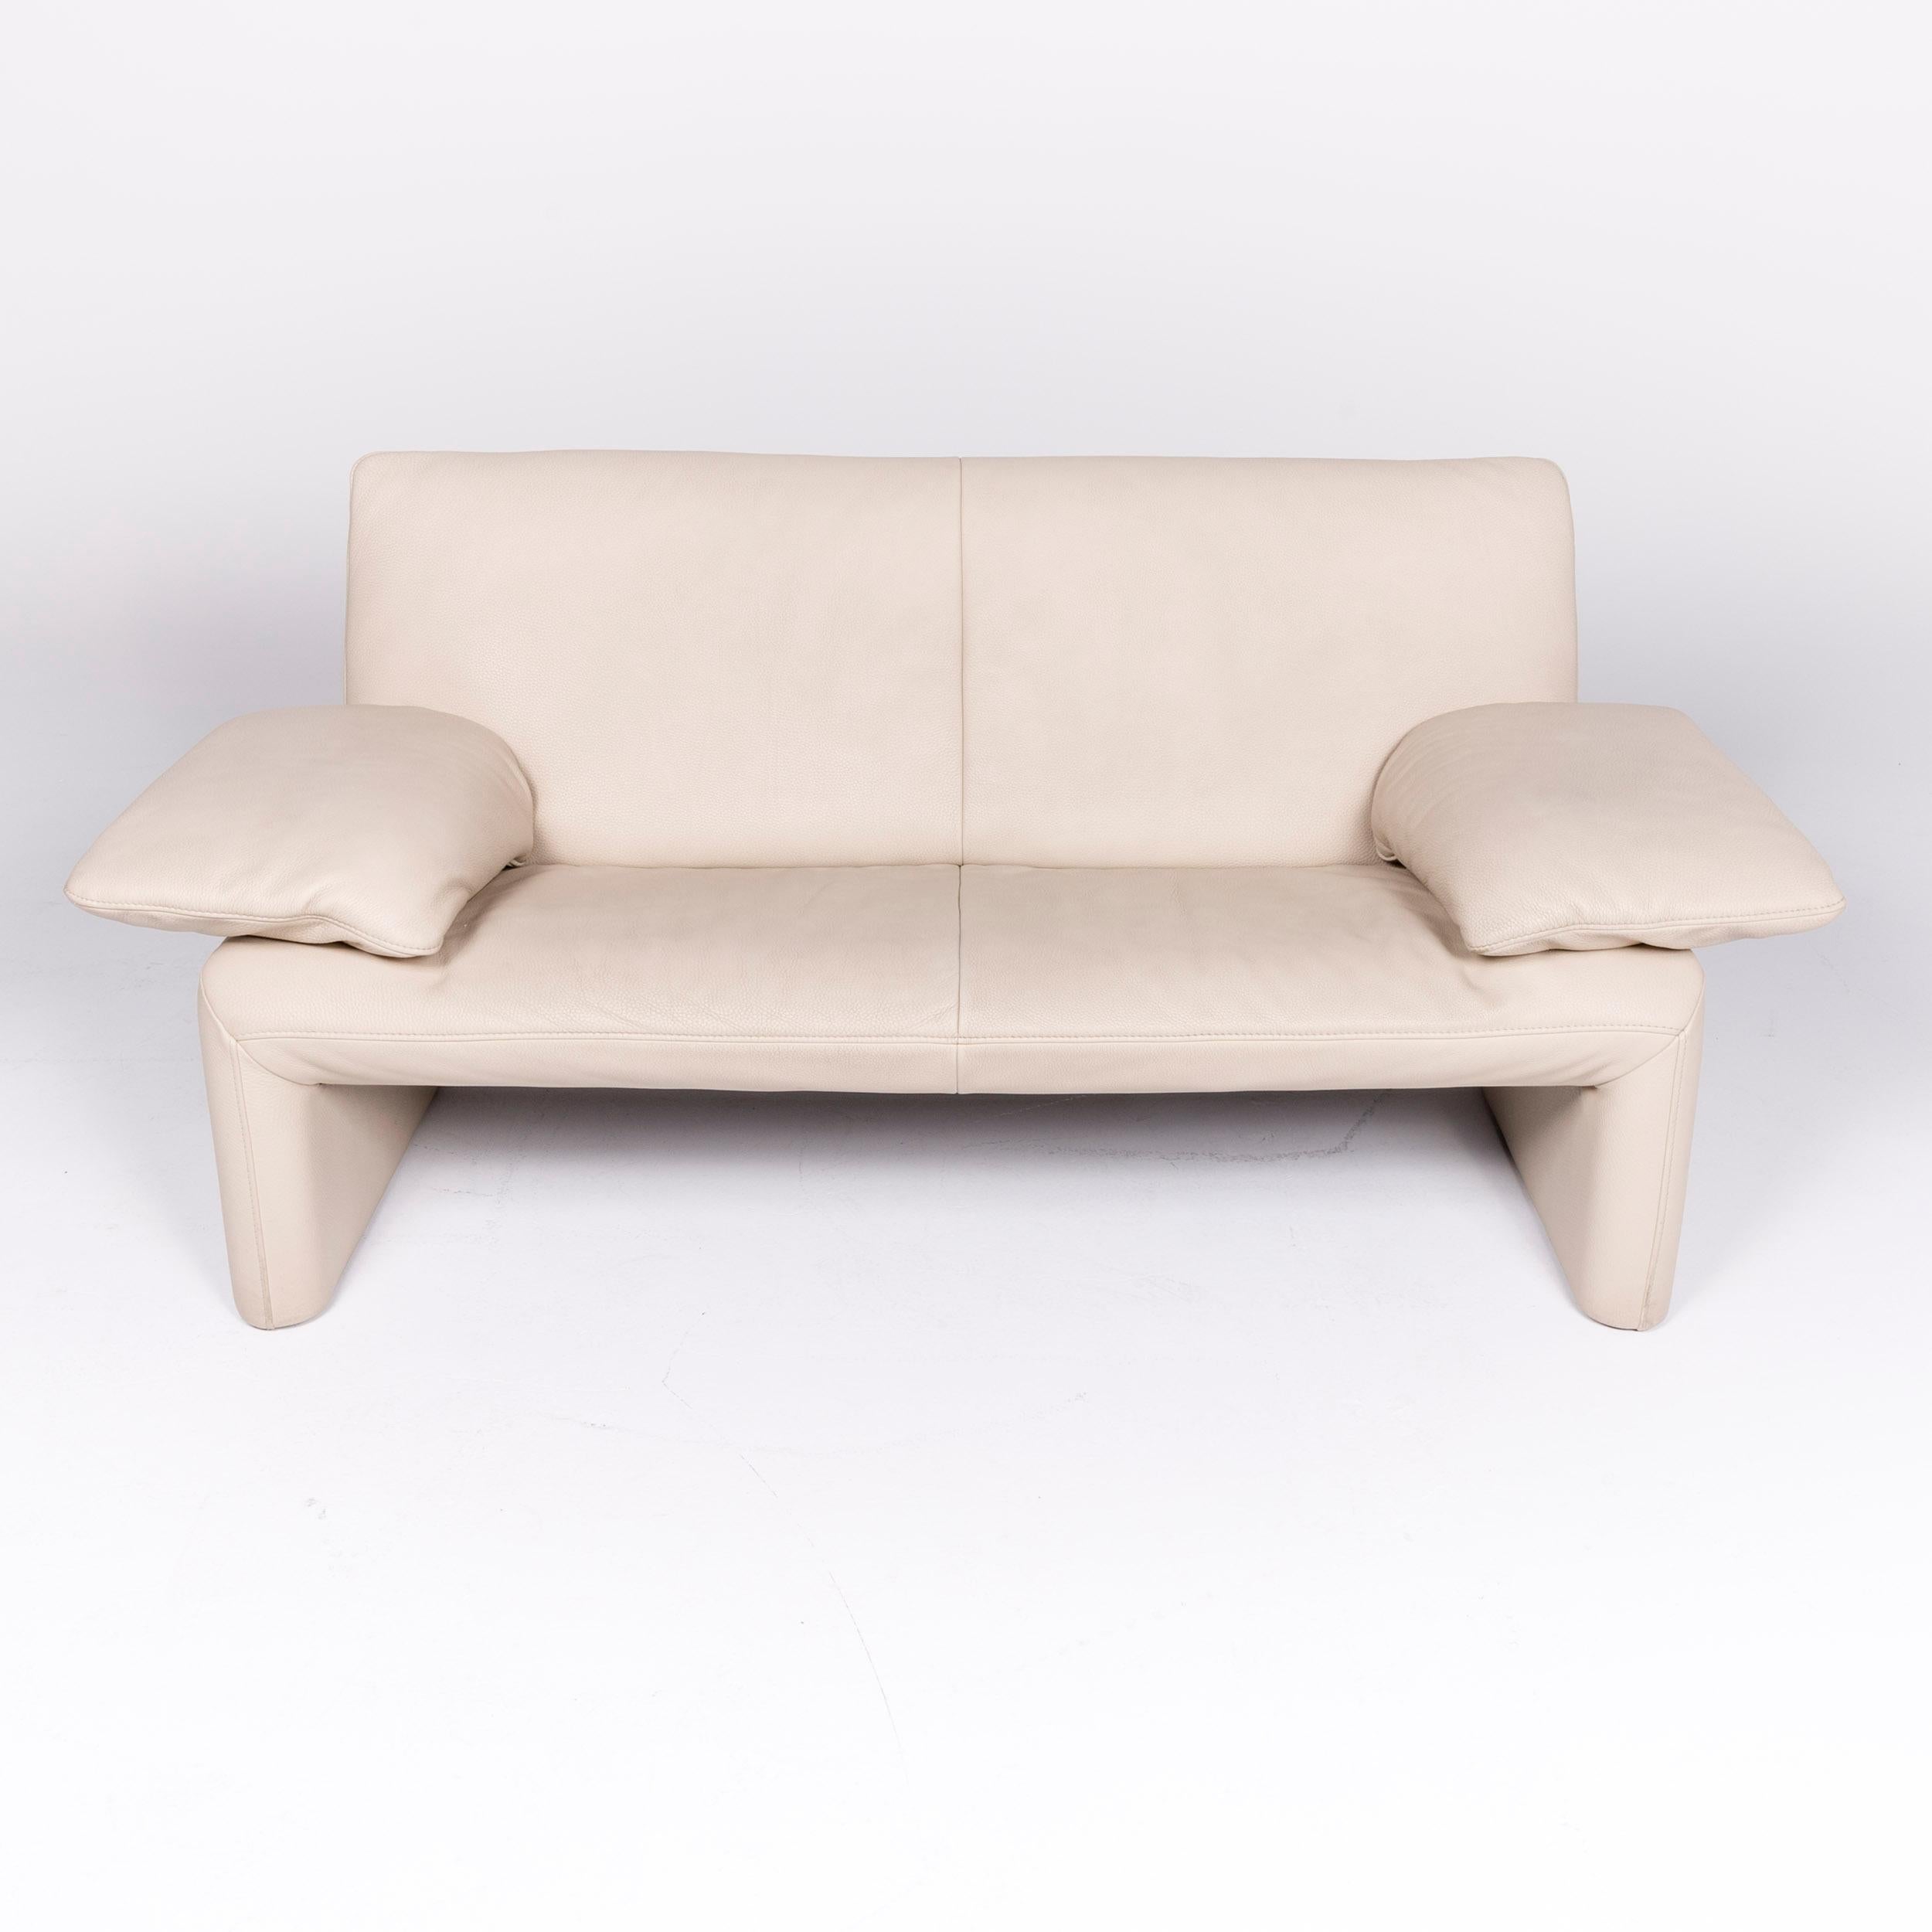 JORI Linea Designer Leather Sofa Beige Real Leather Two-Seat Couch 1